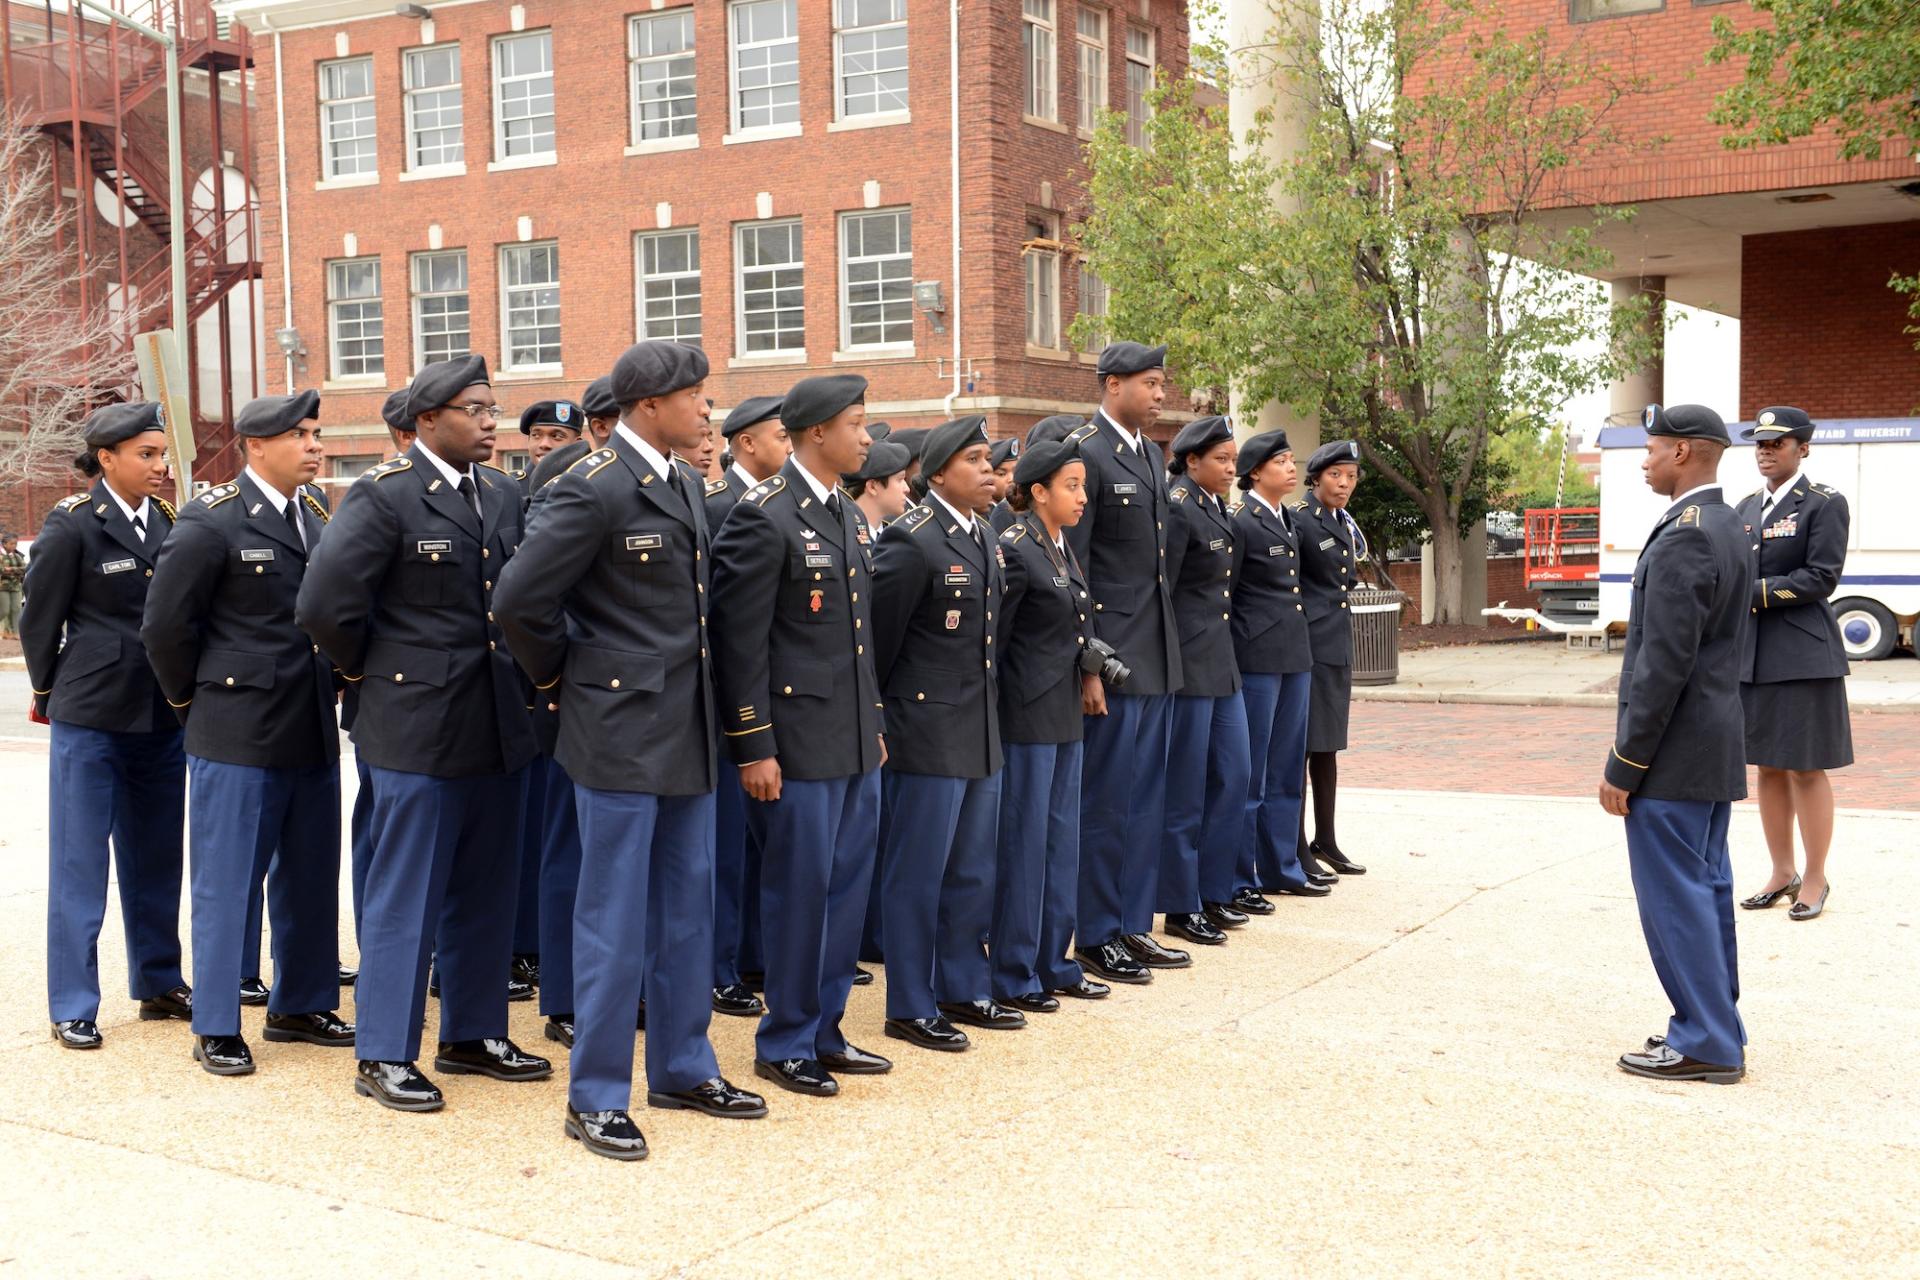 Military proceedings at Howard University begin on campus by the A building, circa 2016 